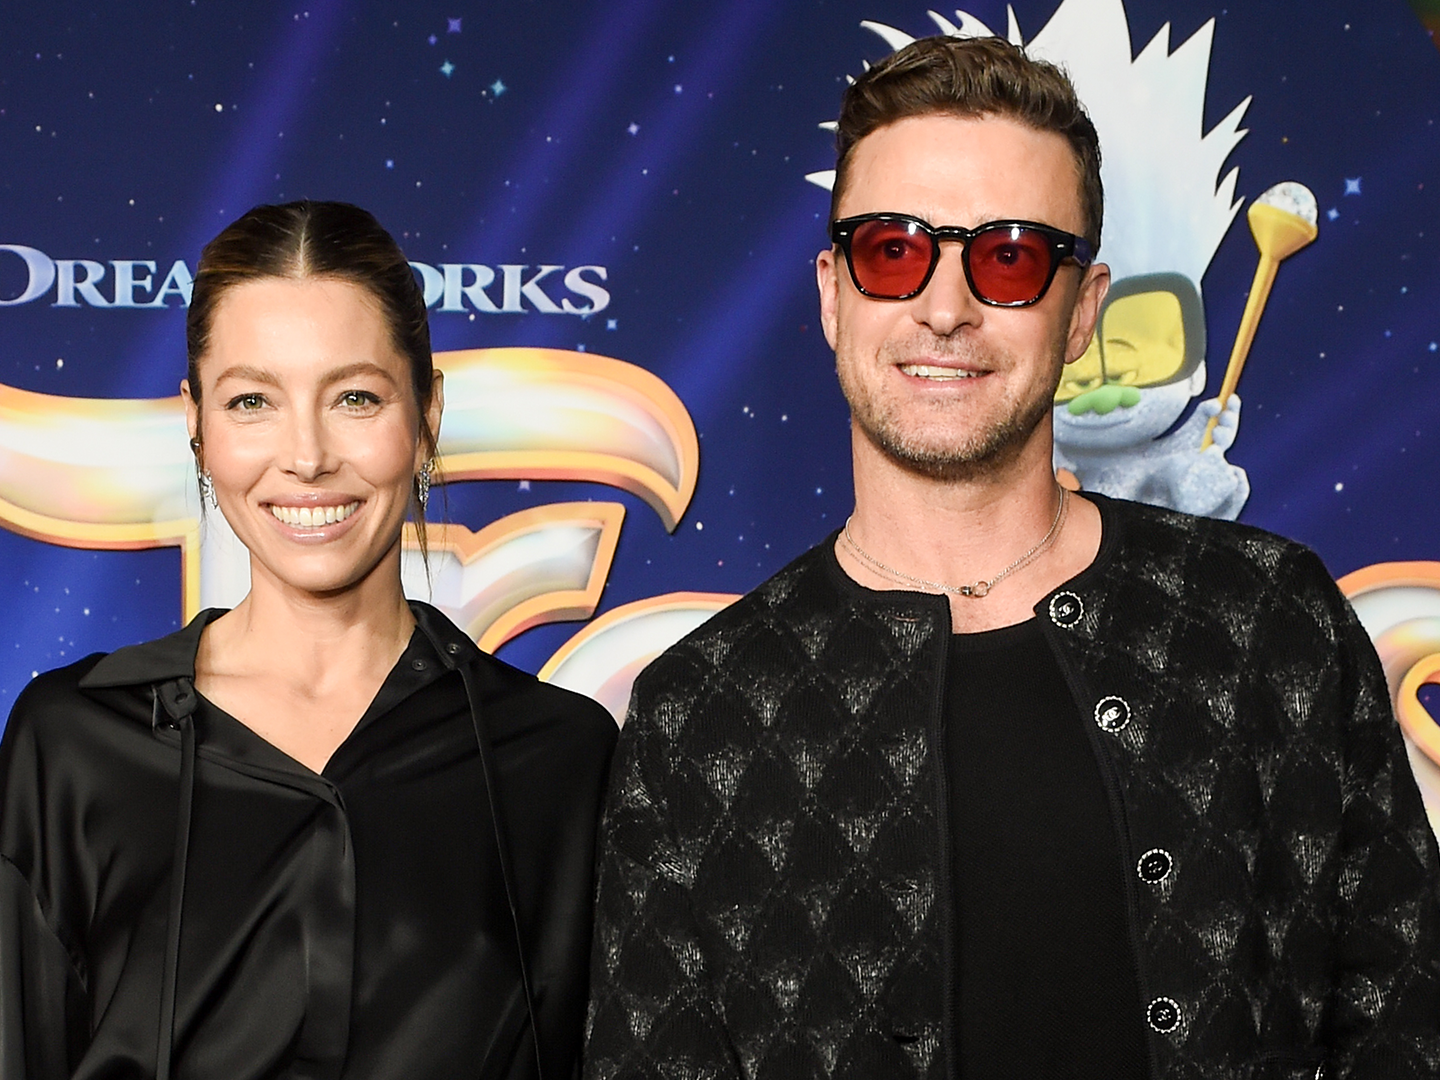 Jessica Biel Reportedly Wasn't Far Away From Justin Timberlake After His DWI Arrest